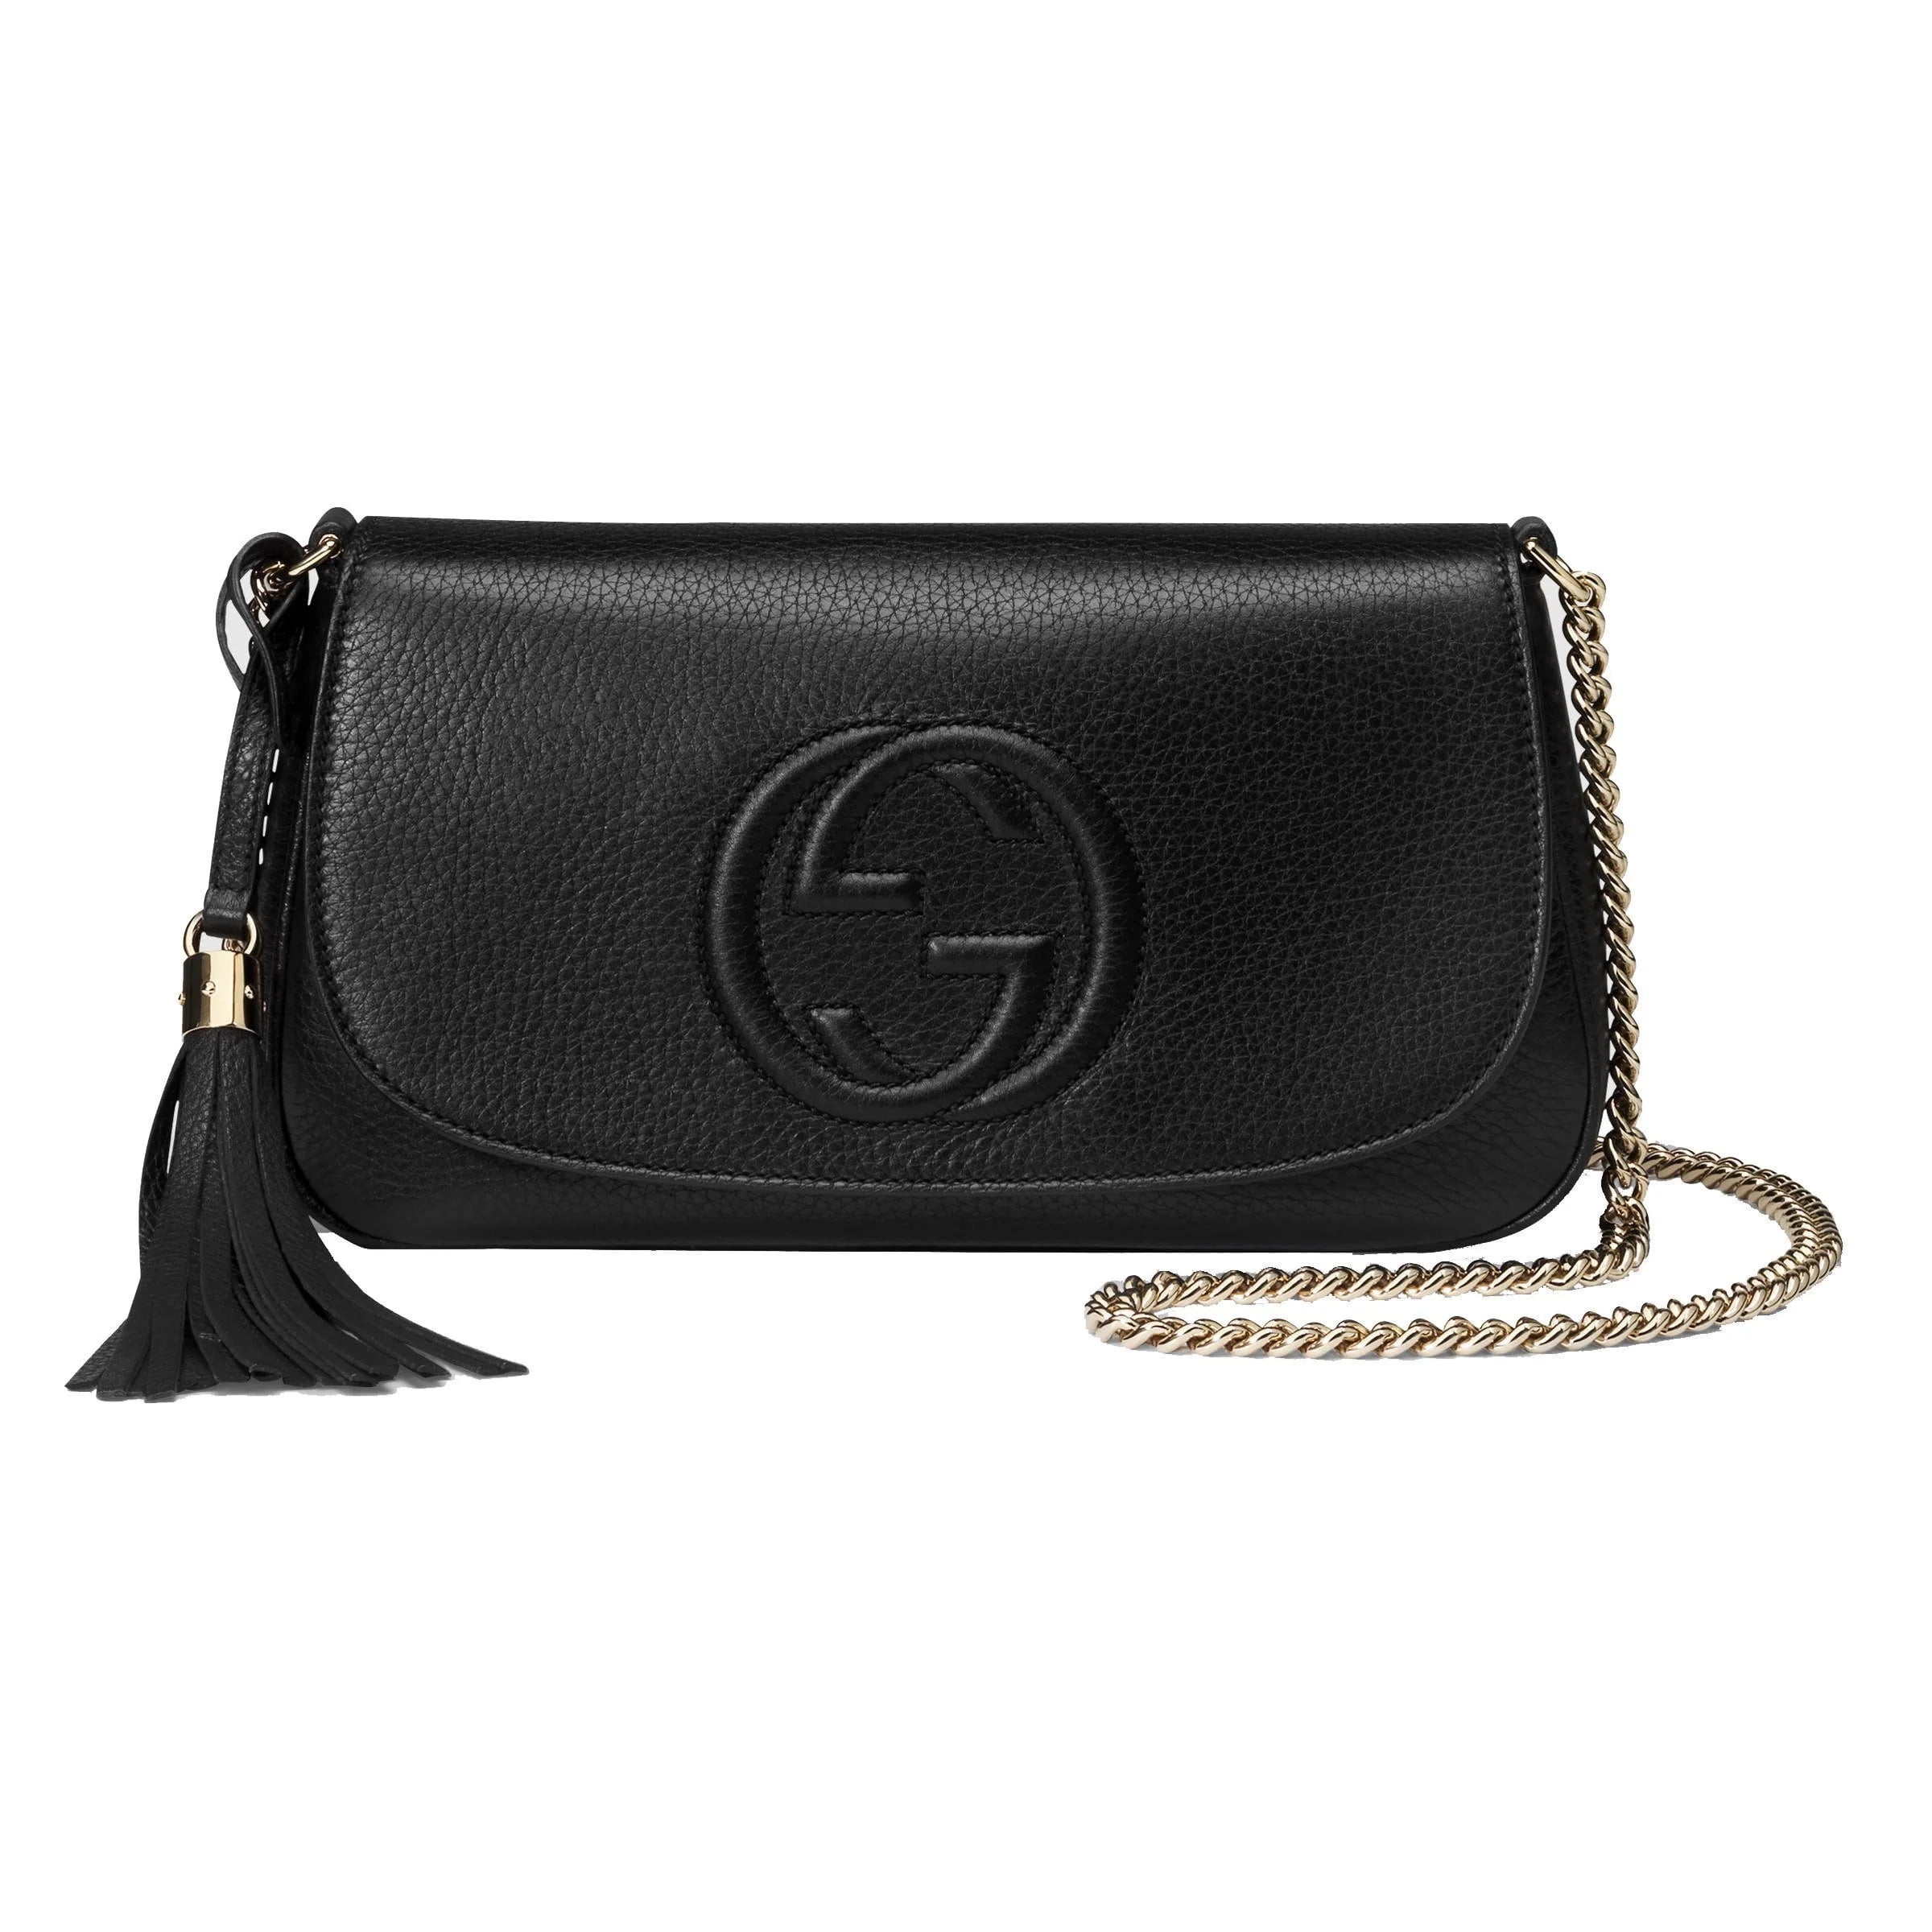 SALE!! At The GUCCI Outlet!!! Unboxing Gucci Soho Hobo Chain Bag! 